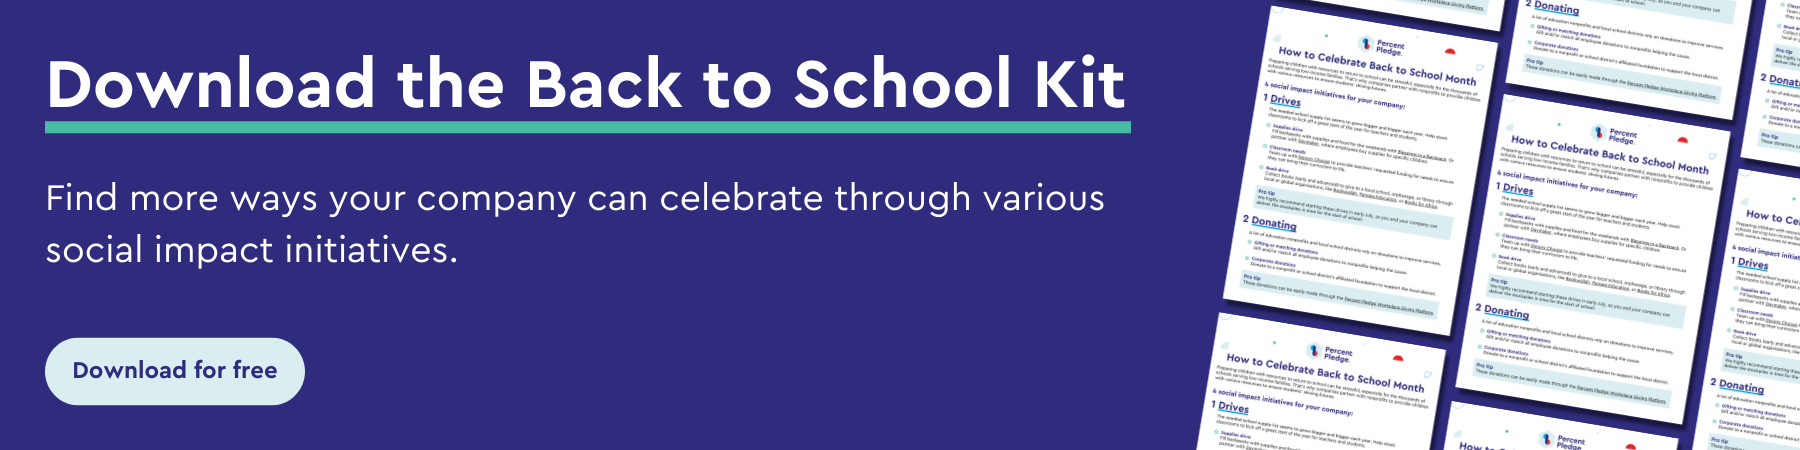 Back to School Kit download call to action